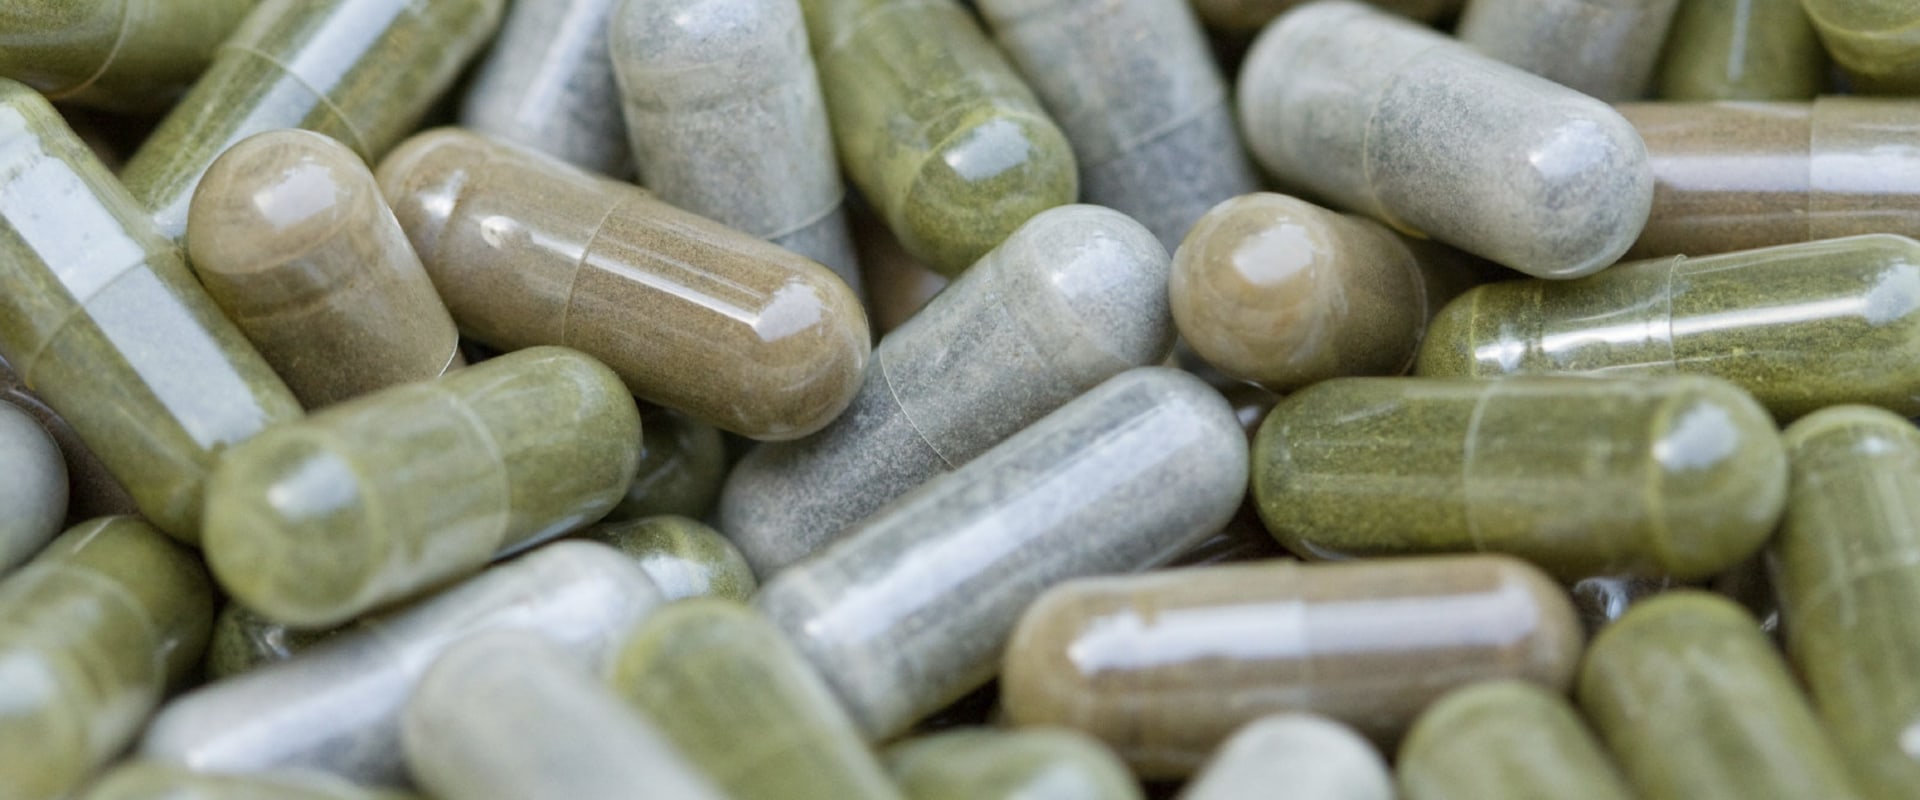 Do dietary supplements require warning labels?